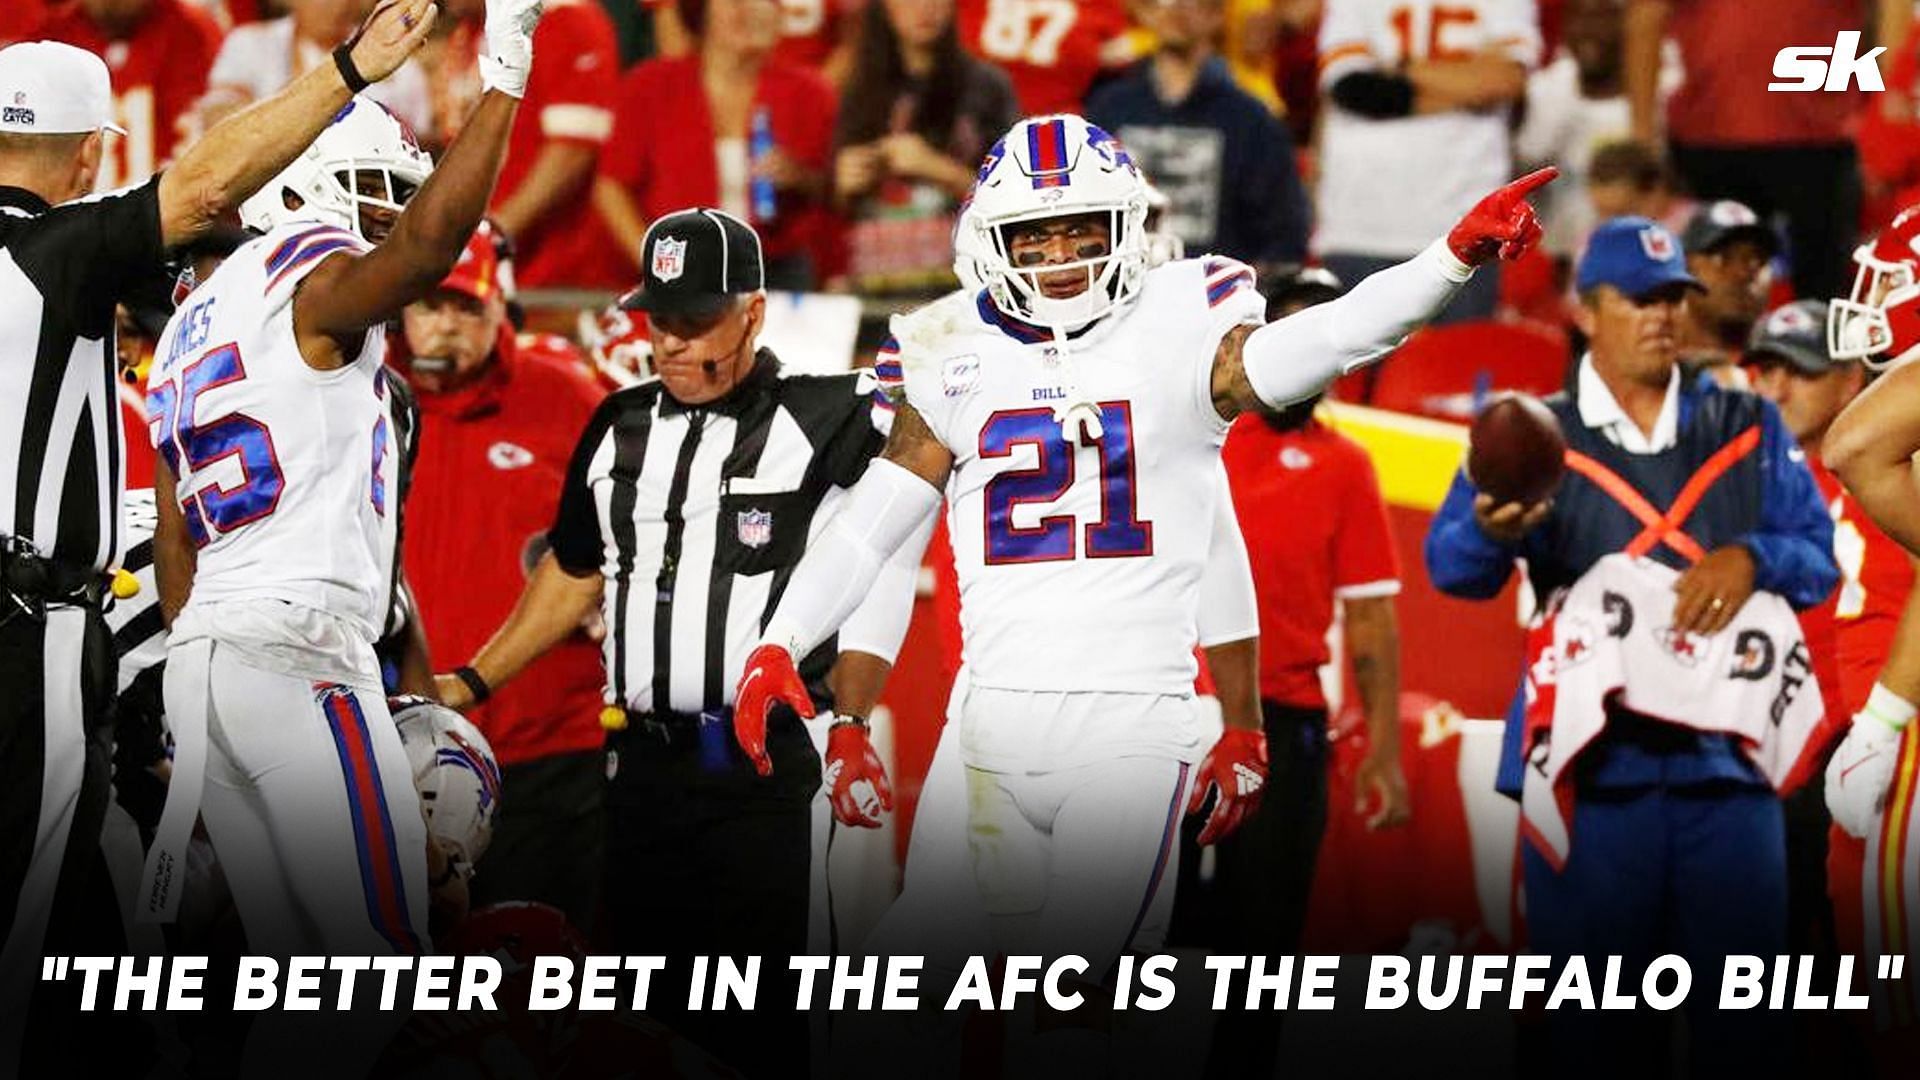 The Buffalo Bills are the &quot;better bet in the AFC&quot;